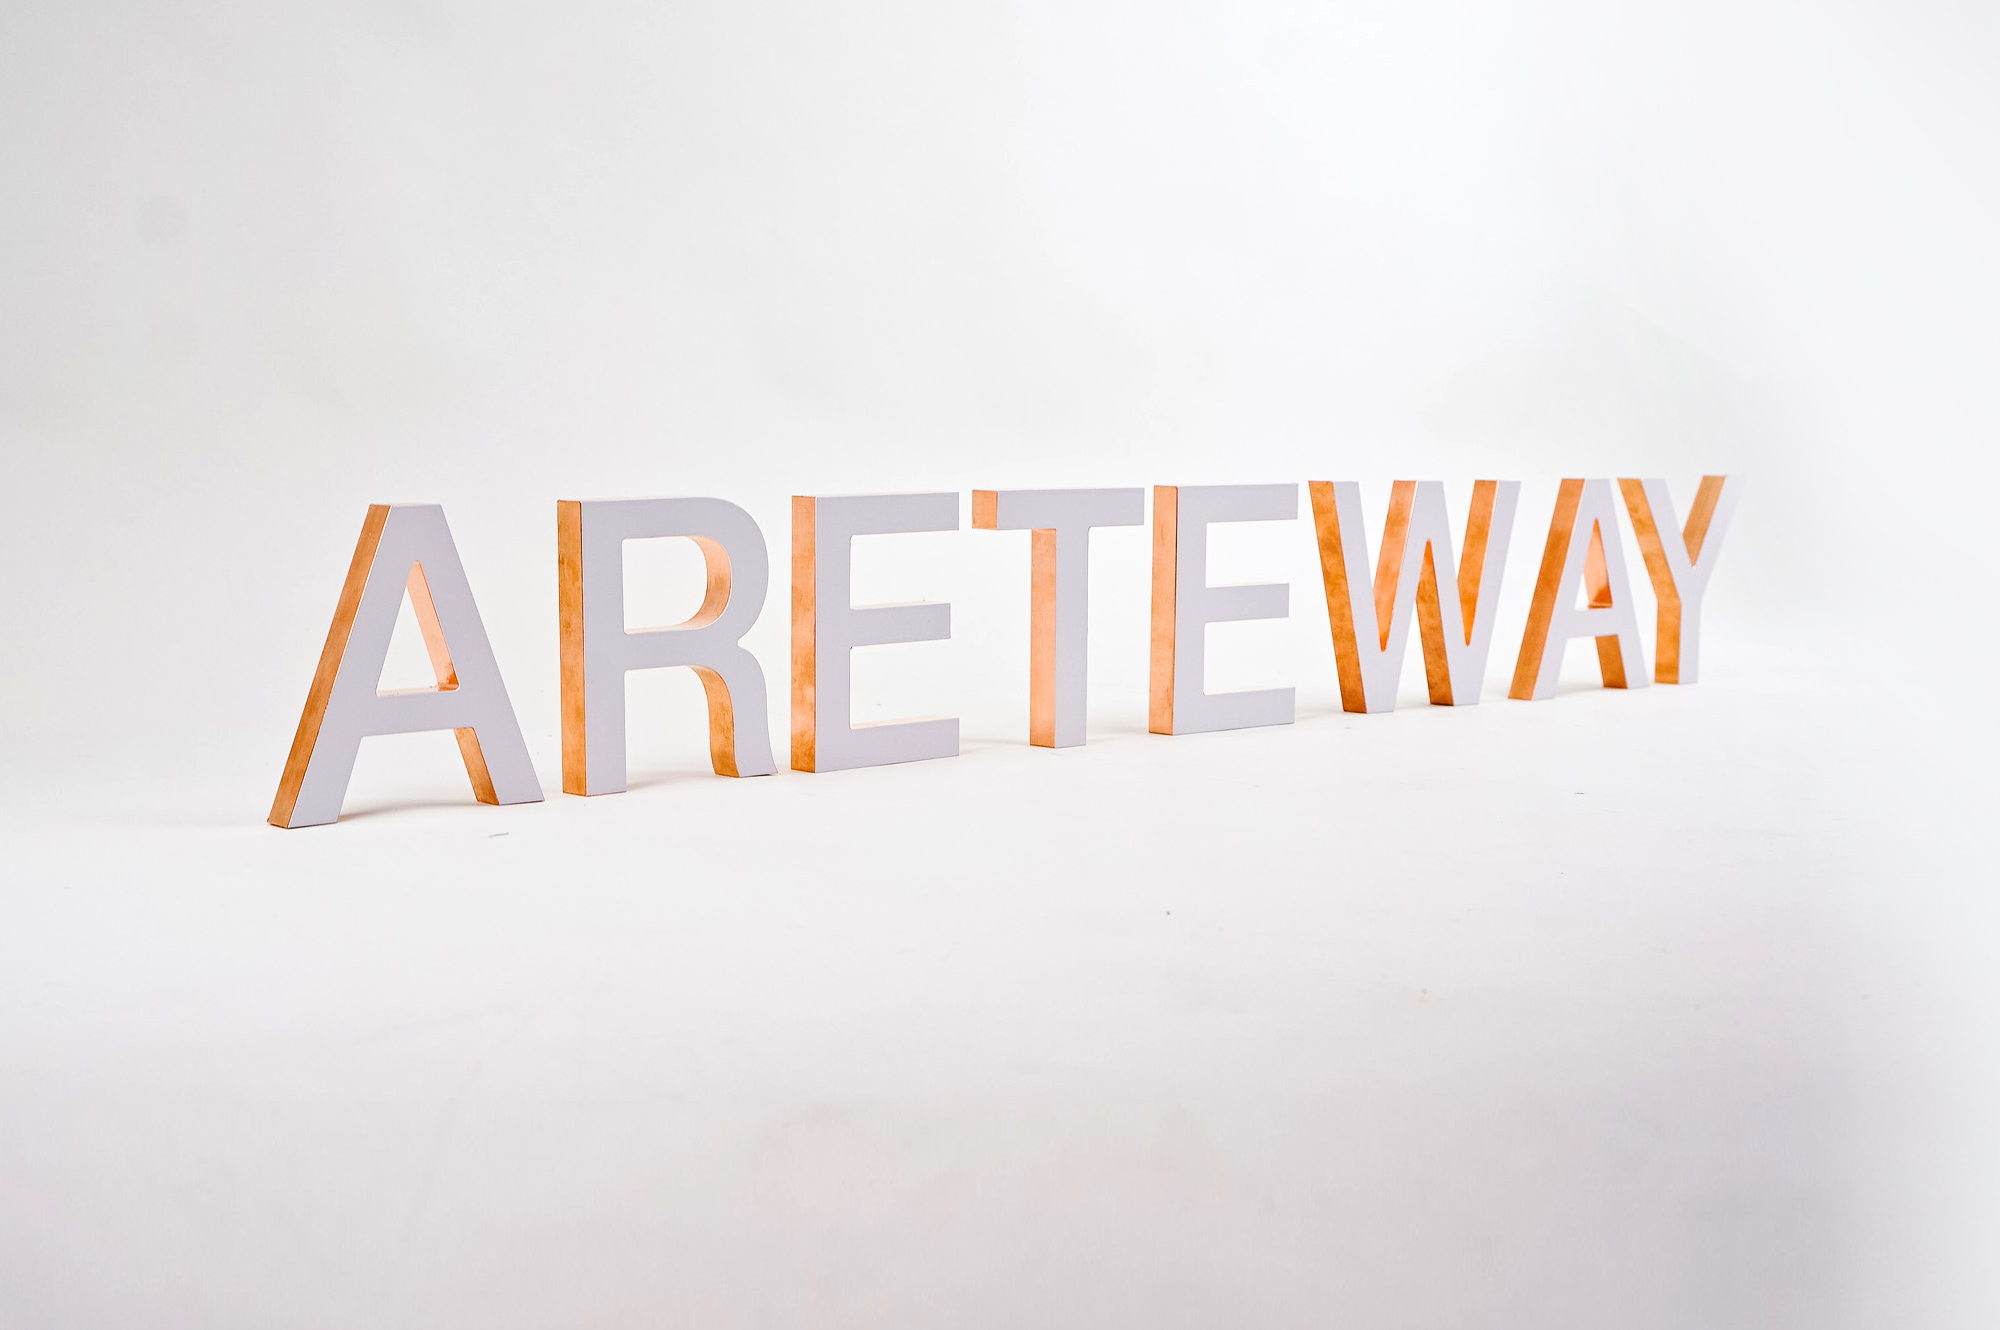 White letters with copper edges for Areteway, a clothing and gift boutique in Santa Rosa, CA.